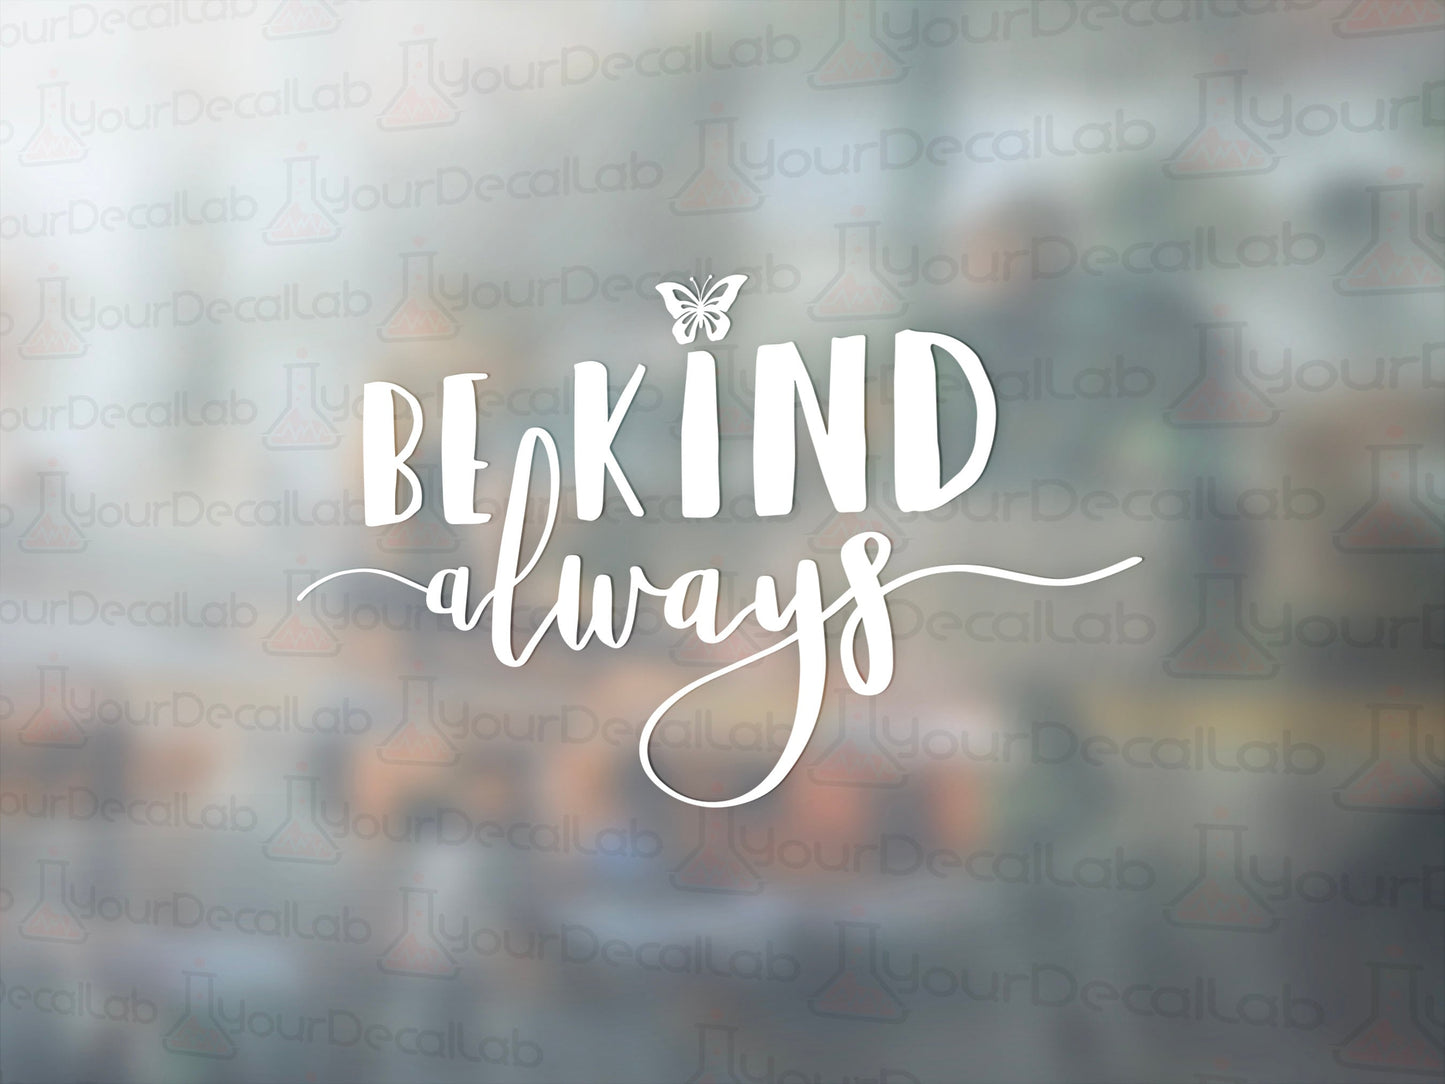 Be Kind Always Decal - Many Colors & Sizes